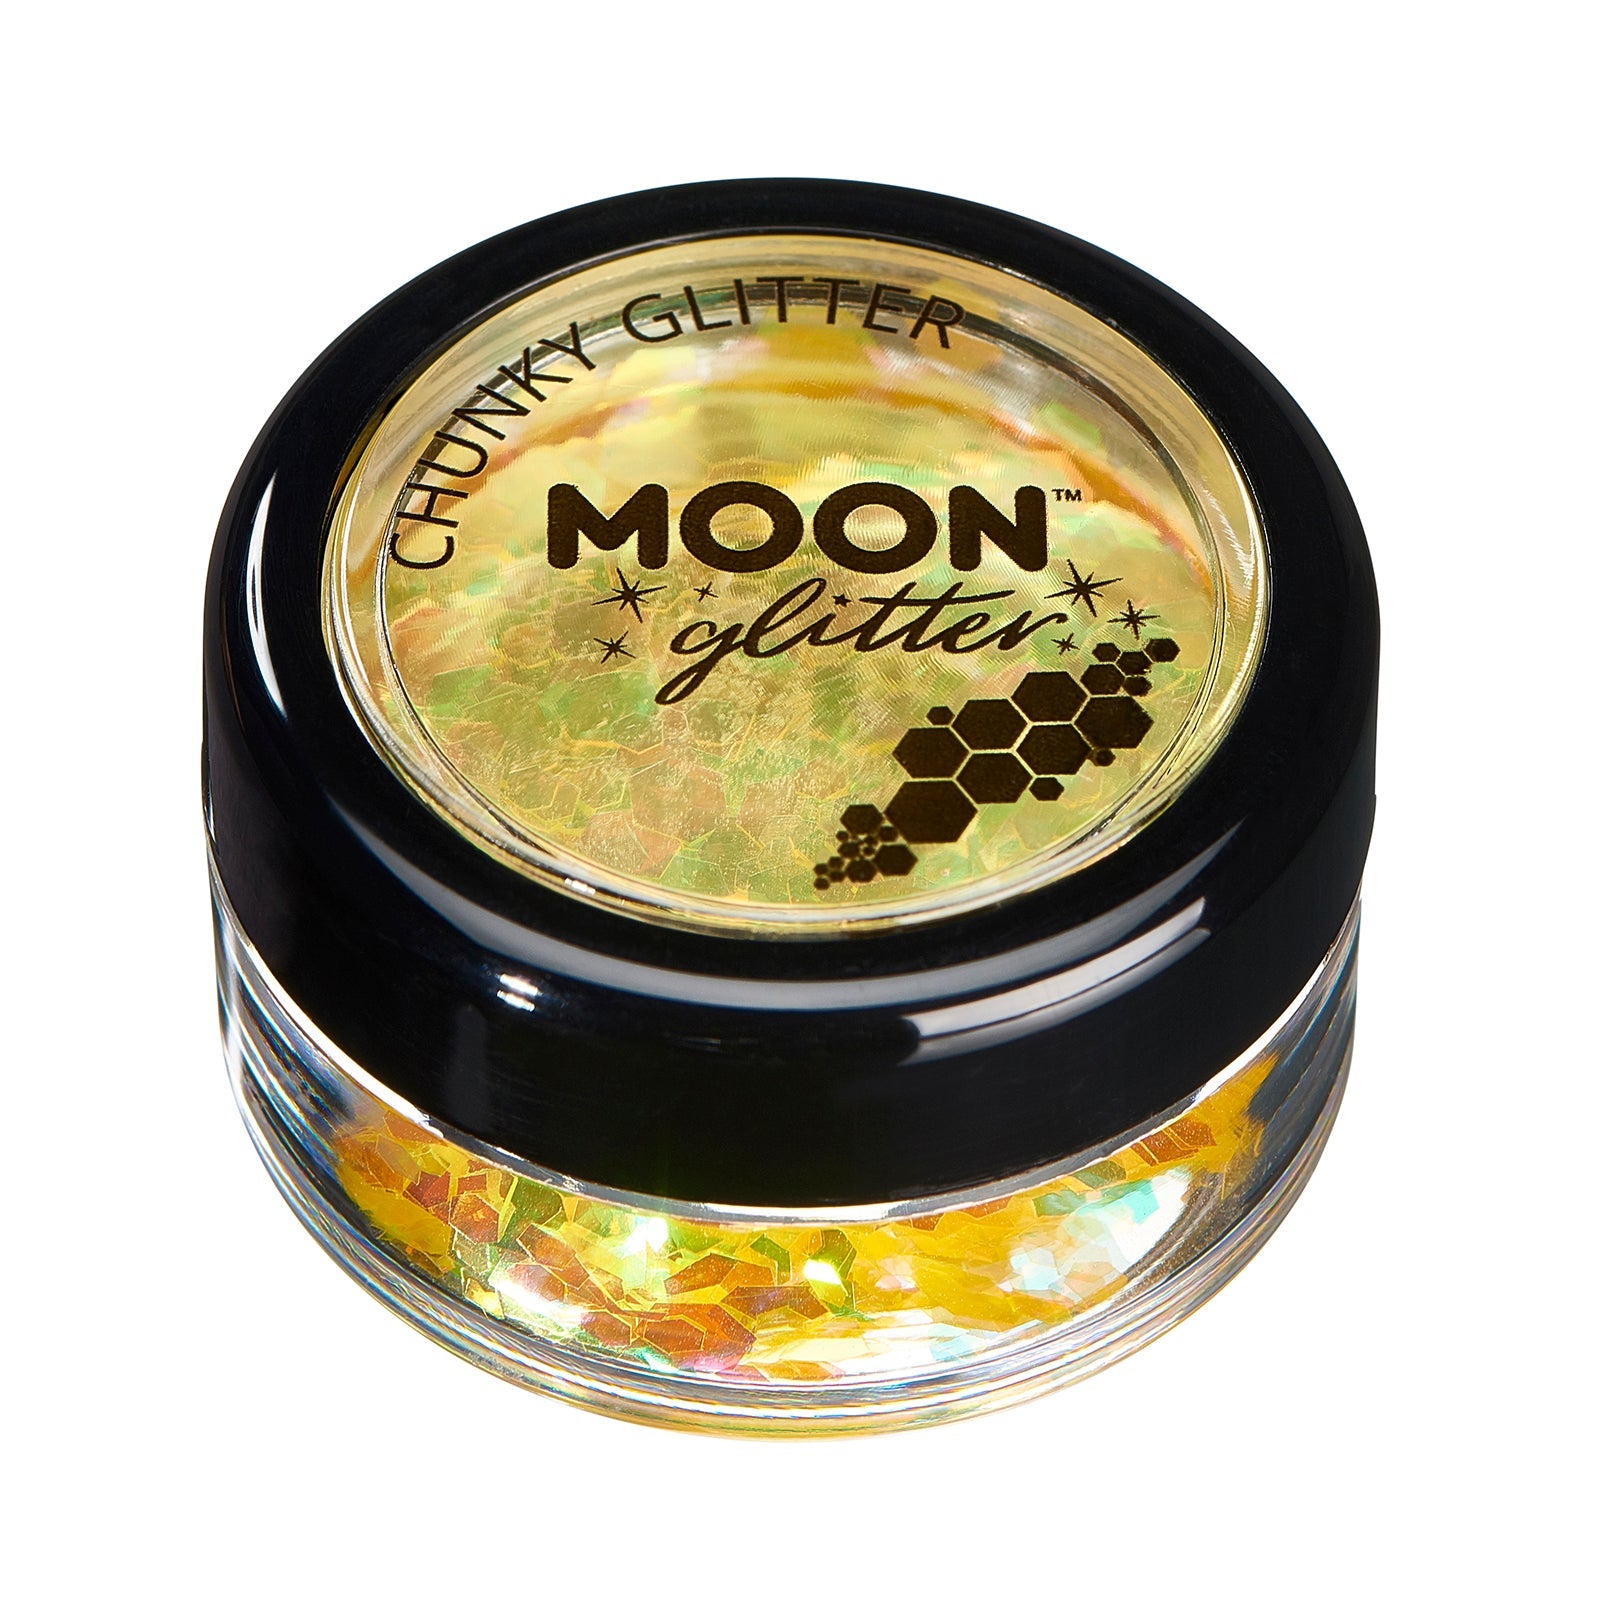 Yellow - Iridescent Chunky Face & Body Glitter, 3g. Cosmetically certified, FDA & Health Canada compliant, cruelty free and vegan.